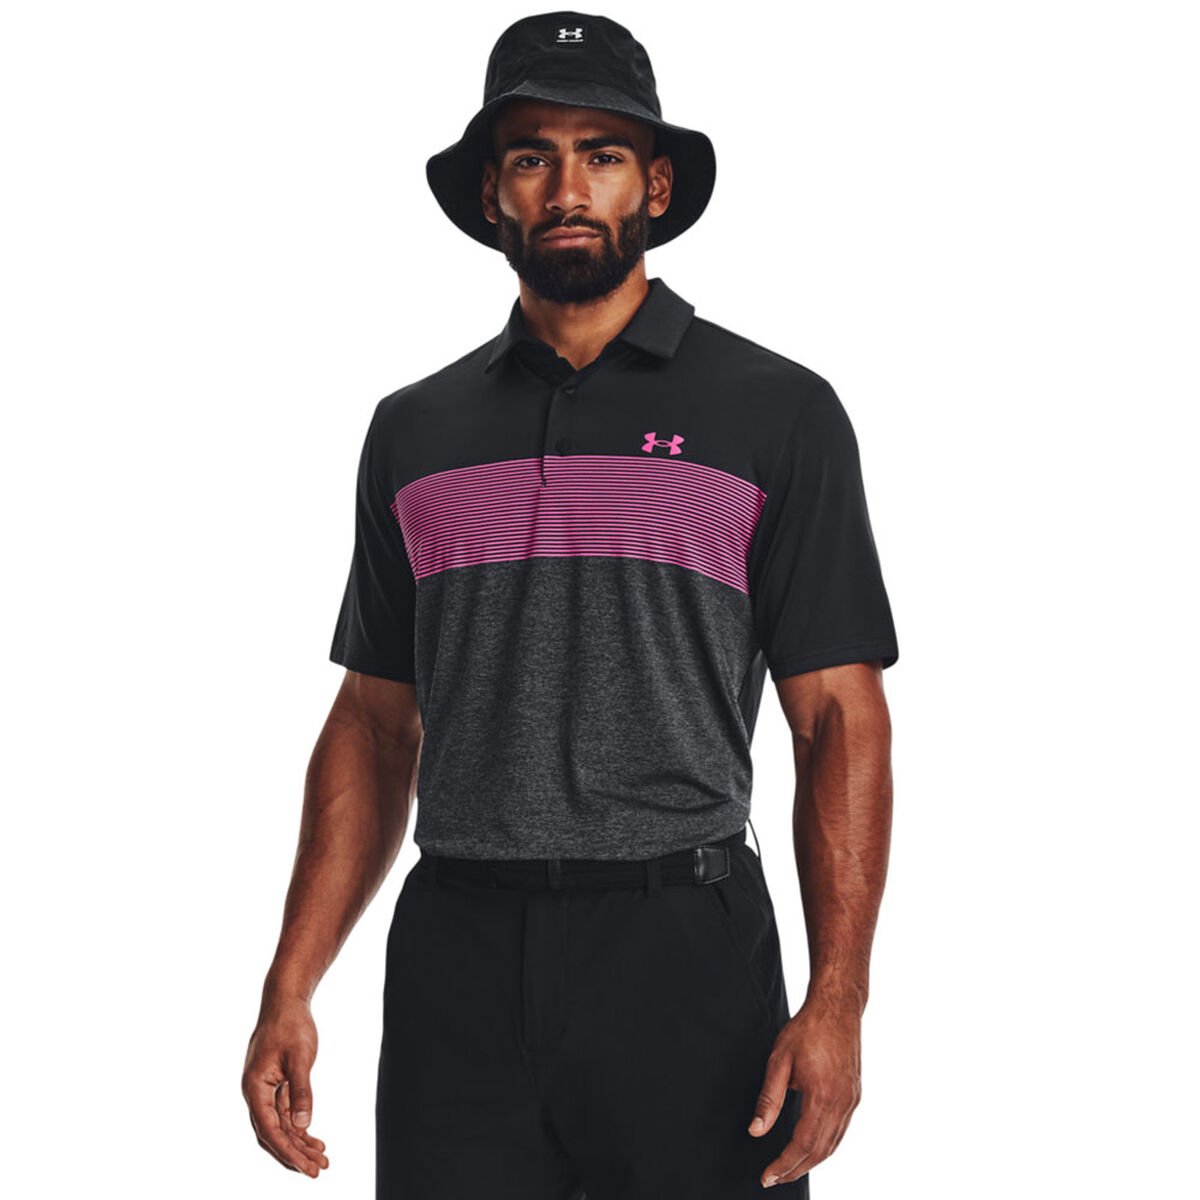 Under Armour Men’s Playoff 3.0 Low Round Stripe Golf Polo Shirt, Mens, Black/jet gray/rebel pink, Small | American Golf